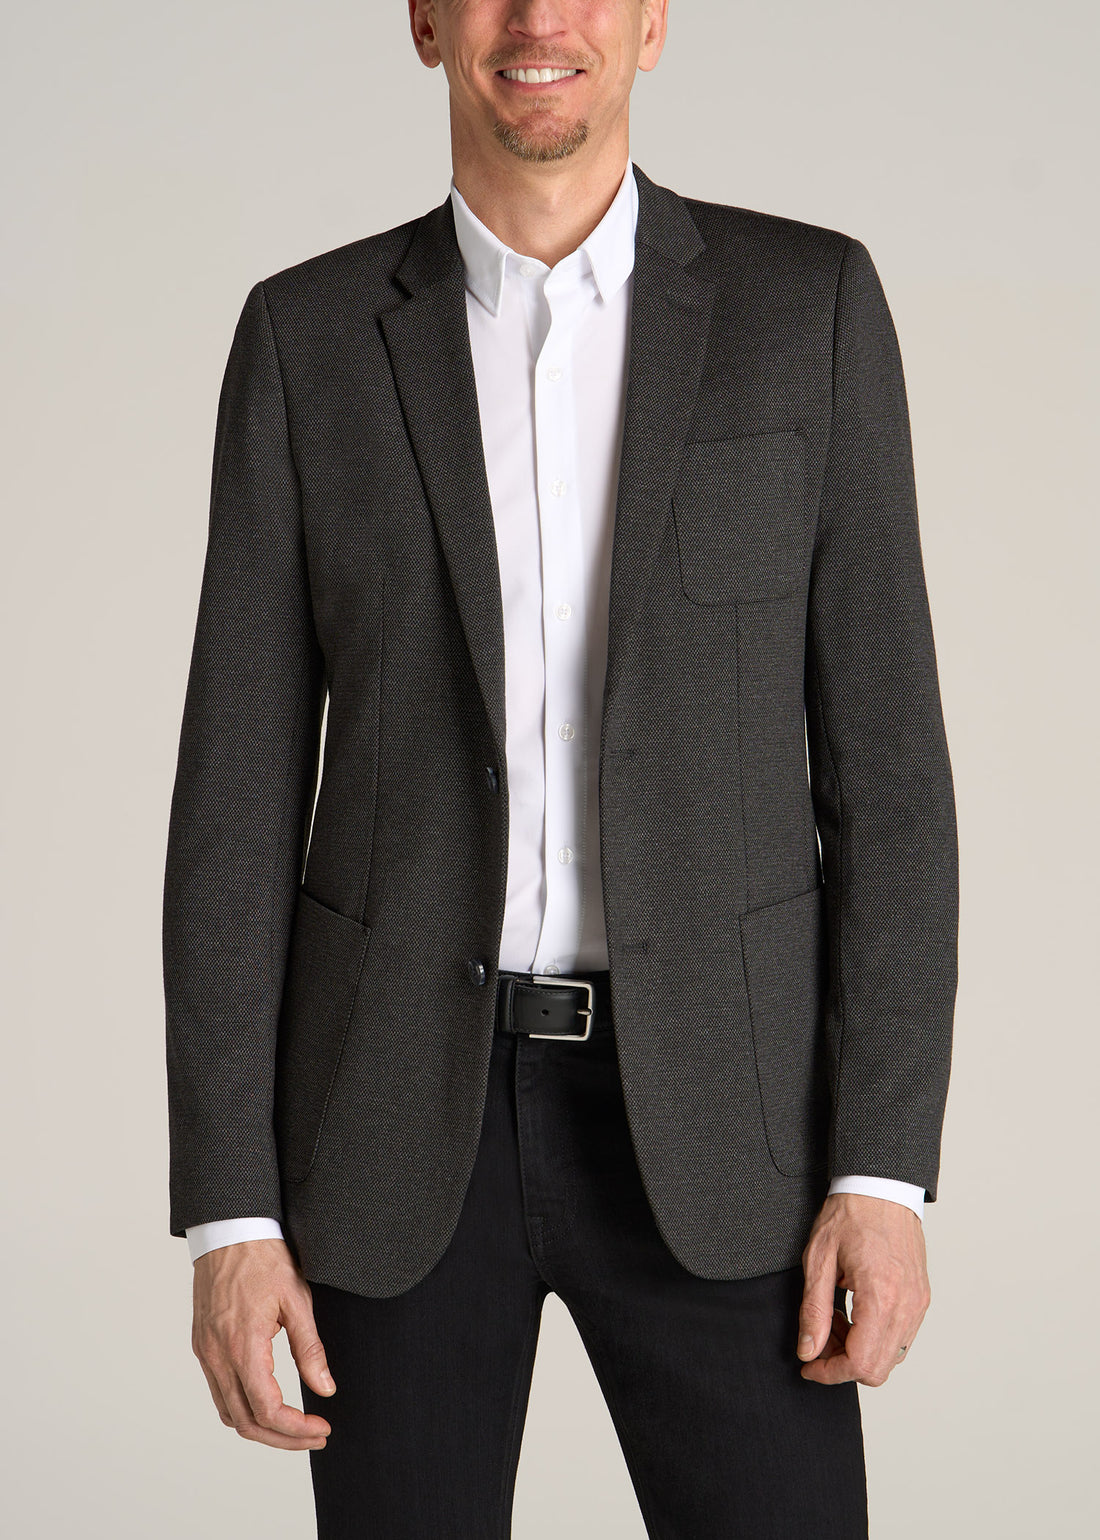 Tall guy wearing American Tall's Blazer in the color Black Silver Mix.